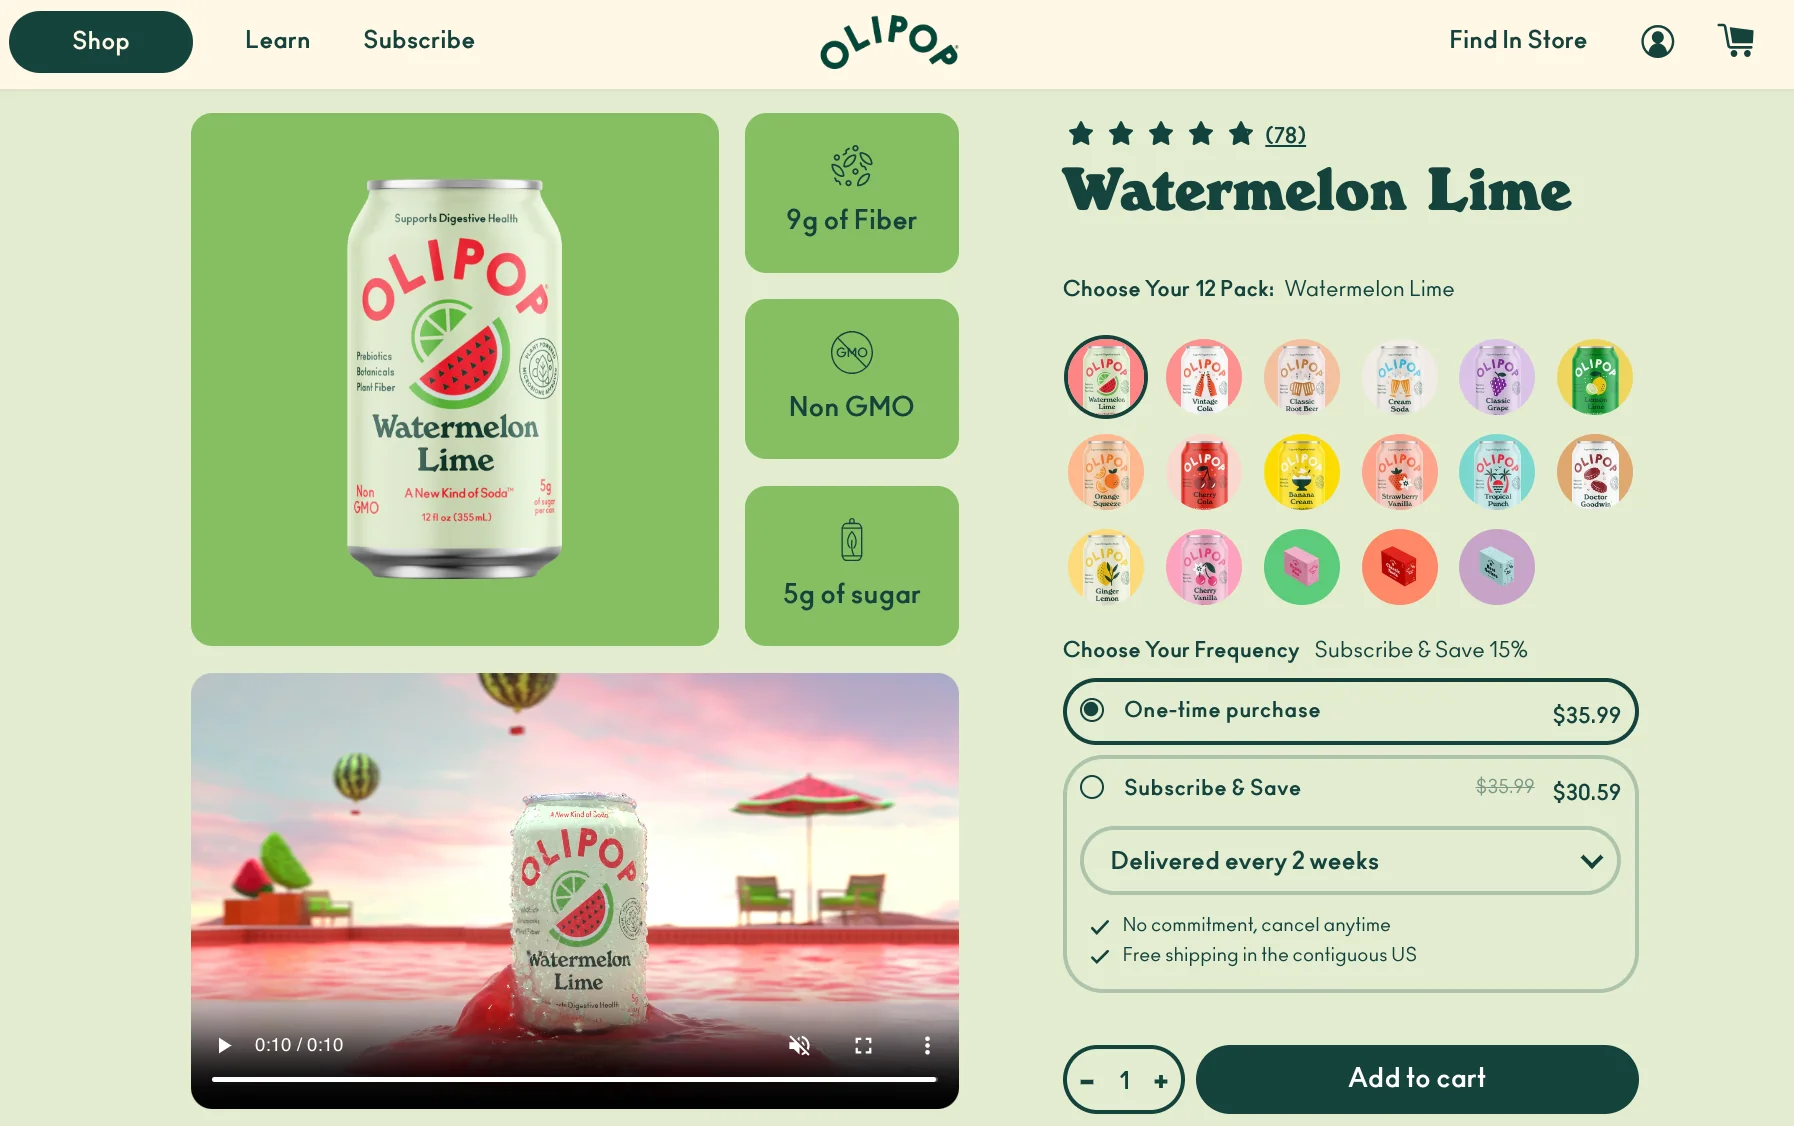 Product page for a watermelon lime soda that includes product features in the image carousel.